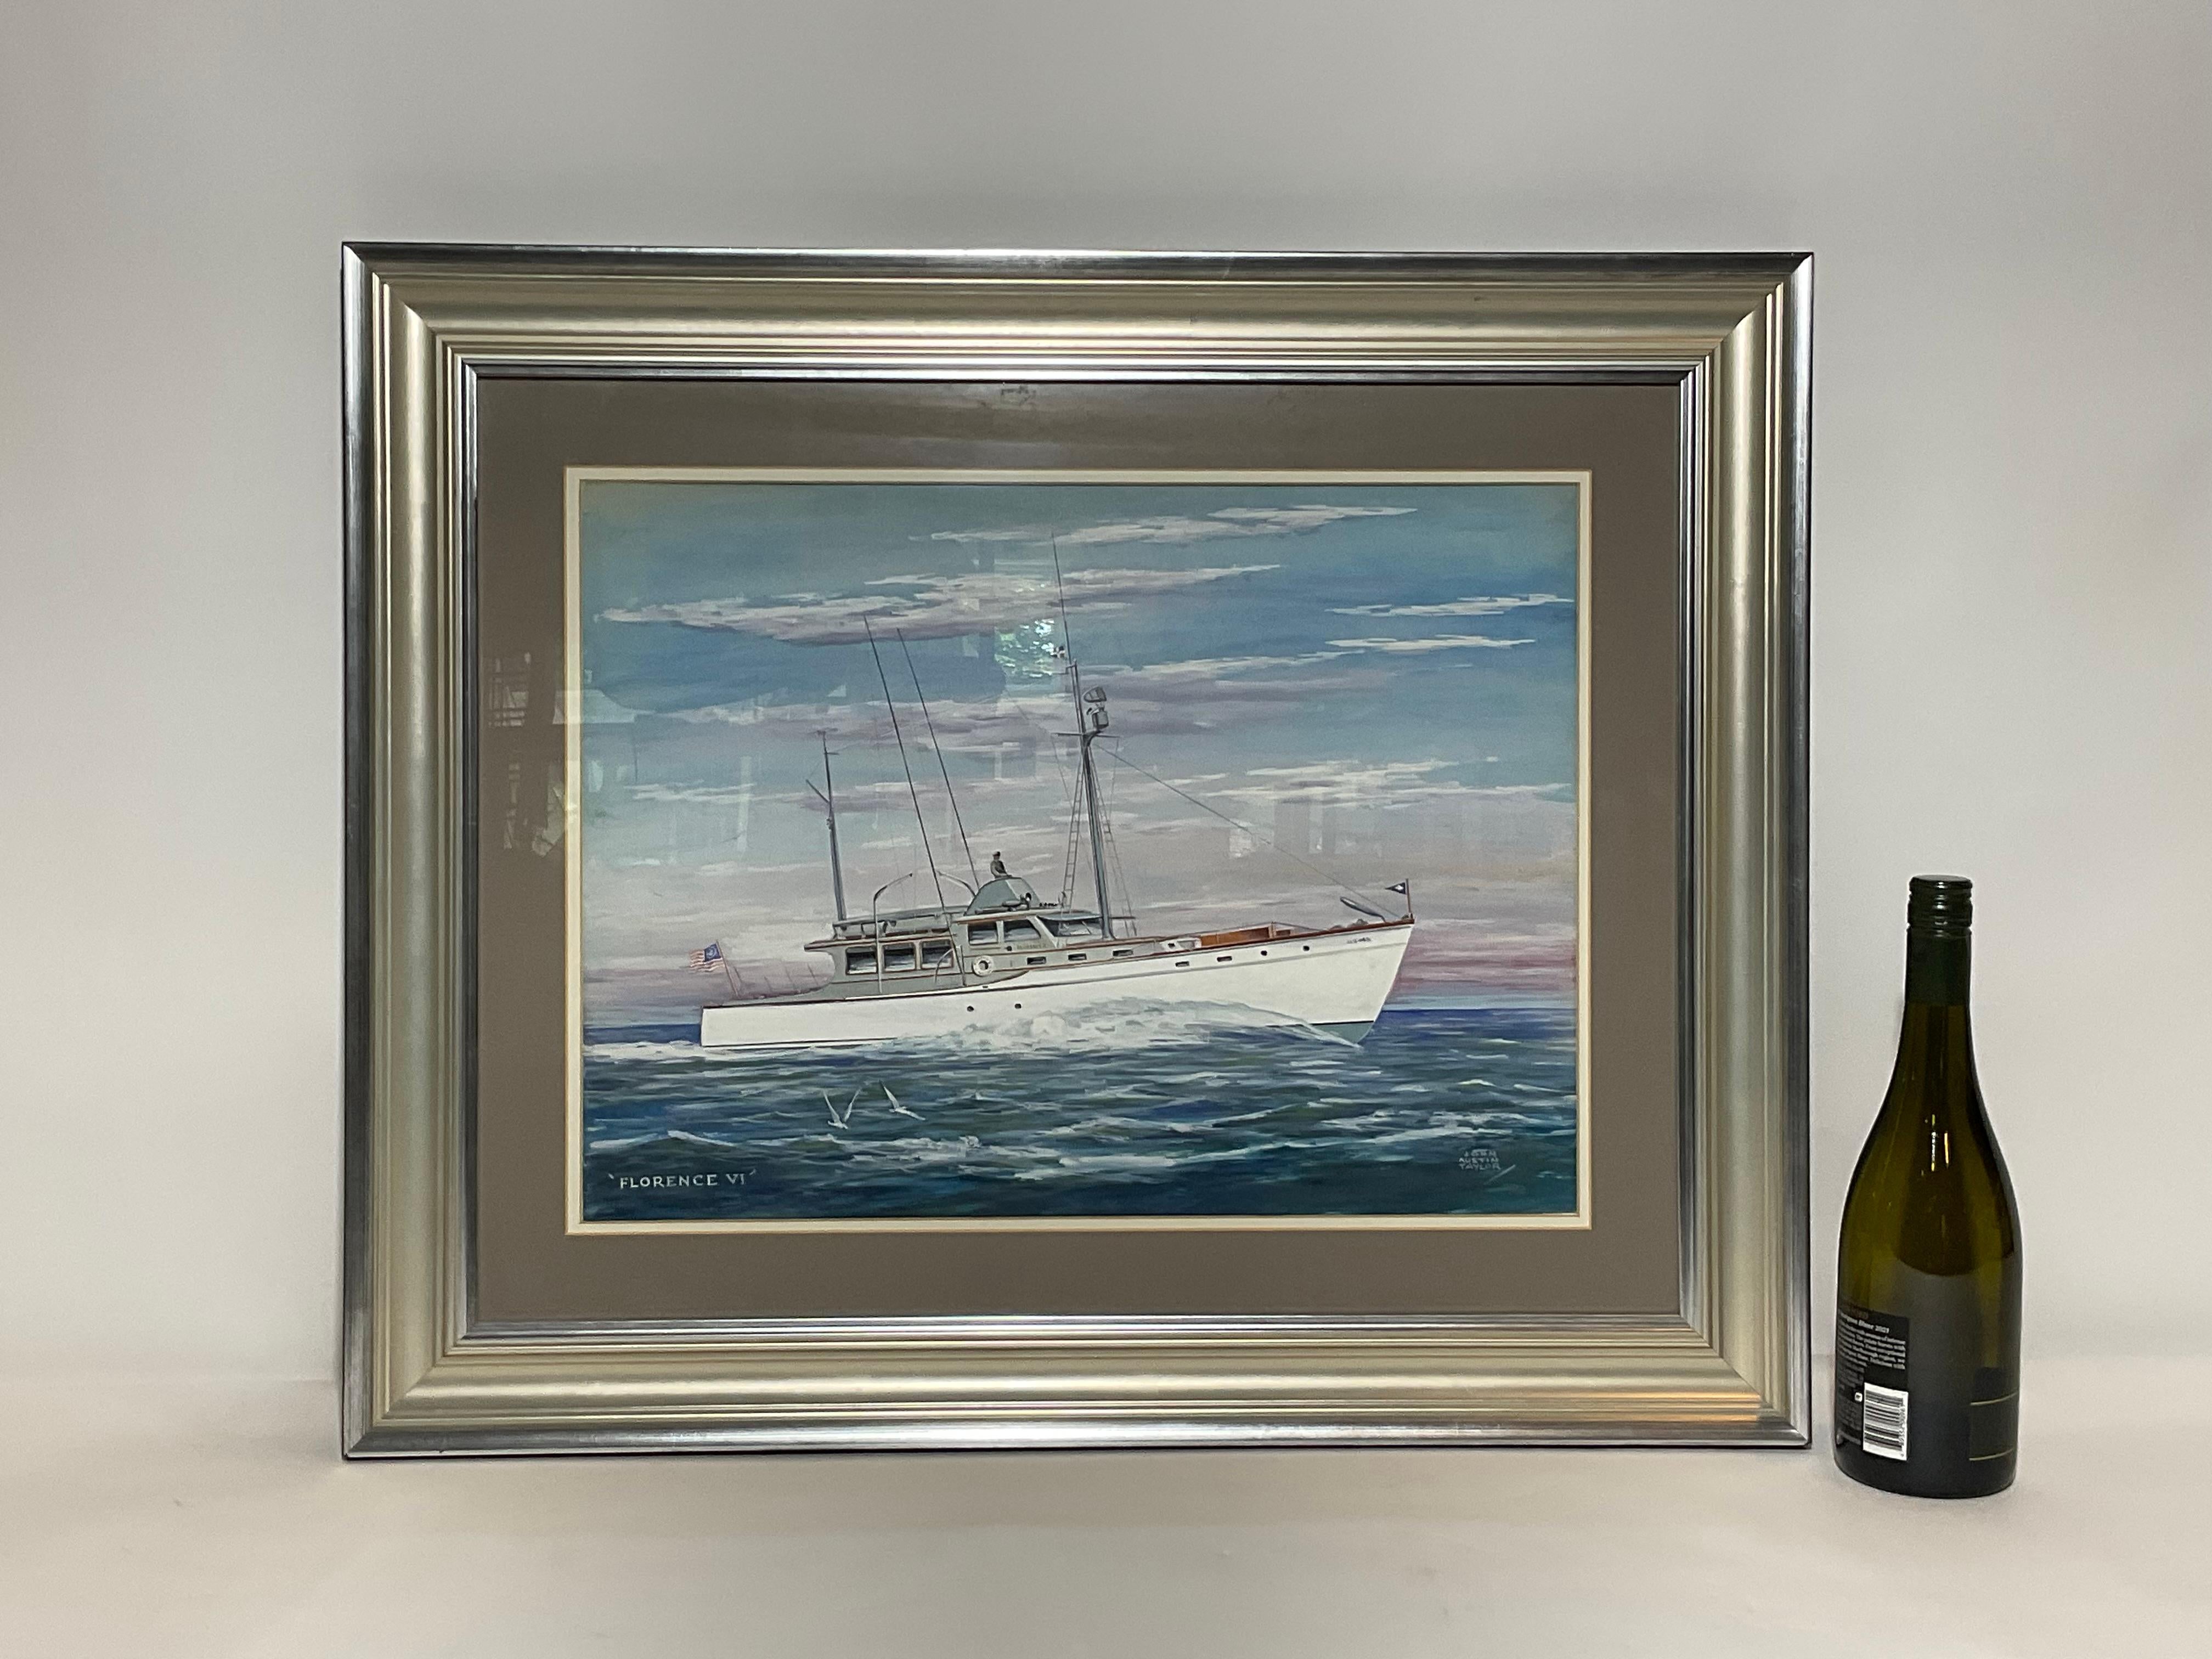 Awesome gouache painting of a big sport fishing vessel. The boat is identified as the Florence IV and has outriggers, davits, mast, searchlights, horns, burgee, ensign, etc., signed lower right John Austin Taylor. Double matted and framed.

Weight: